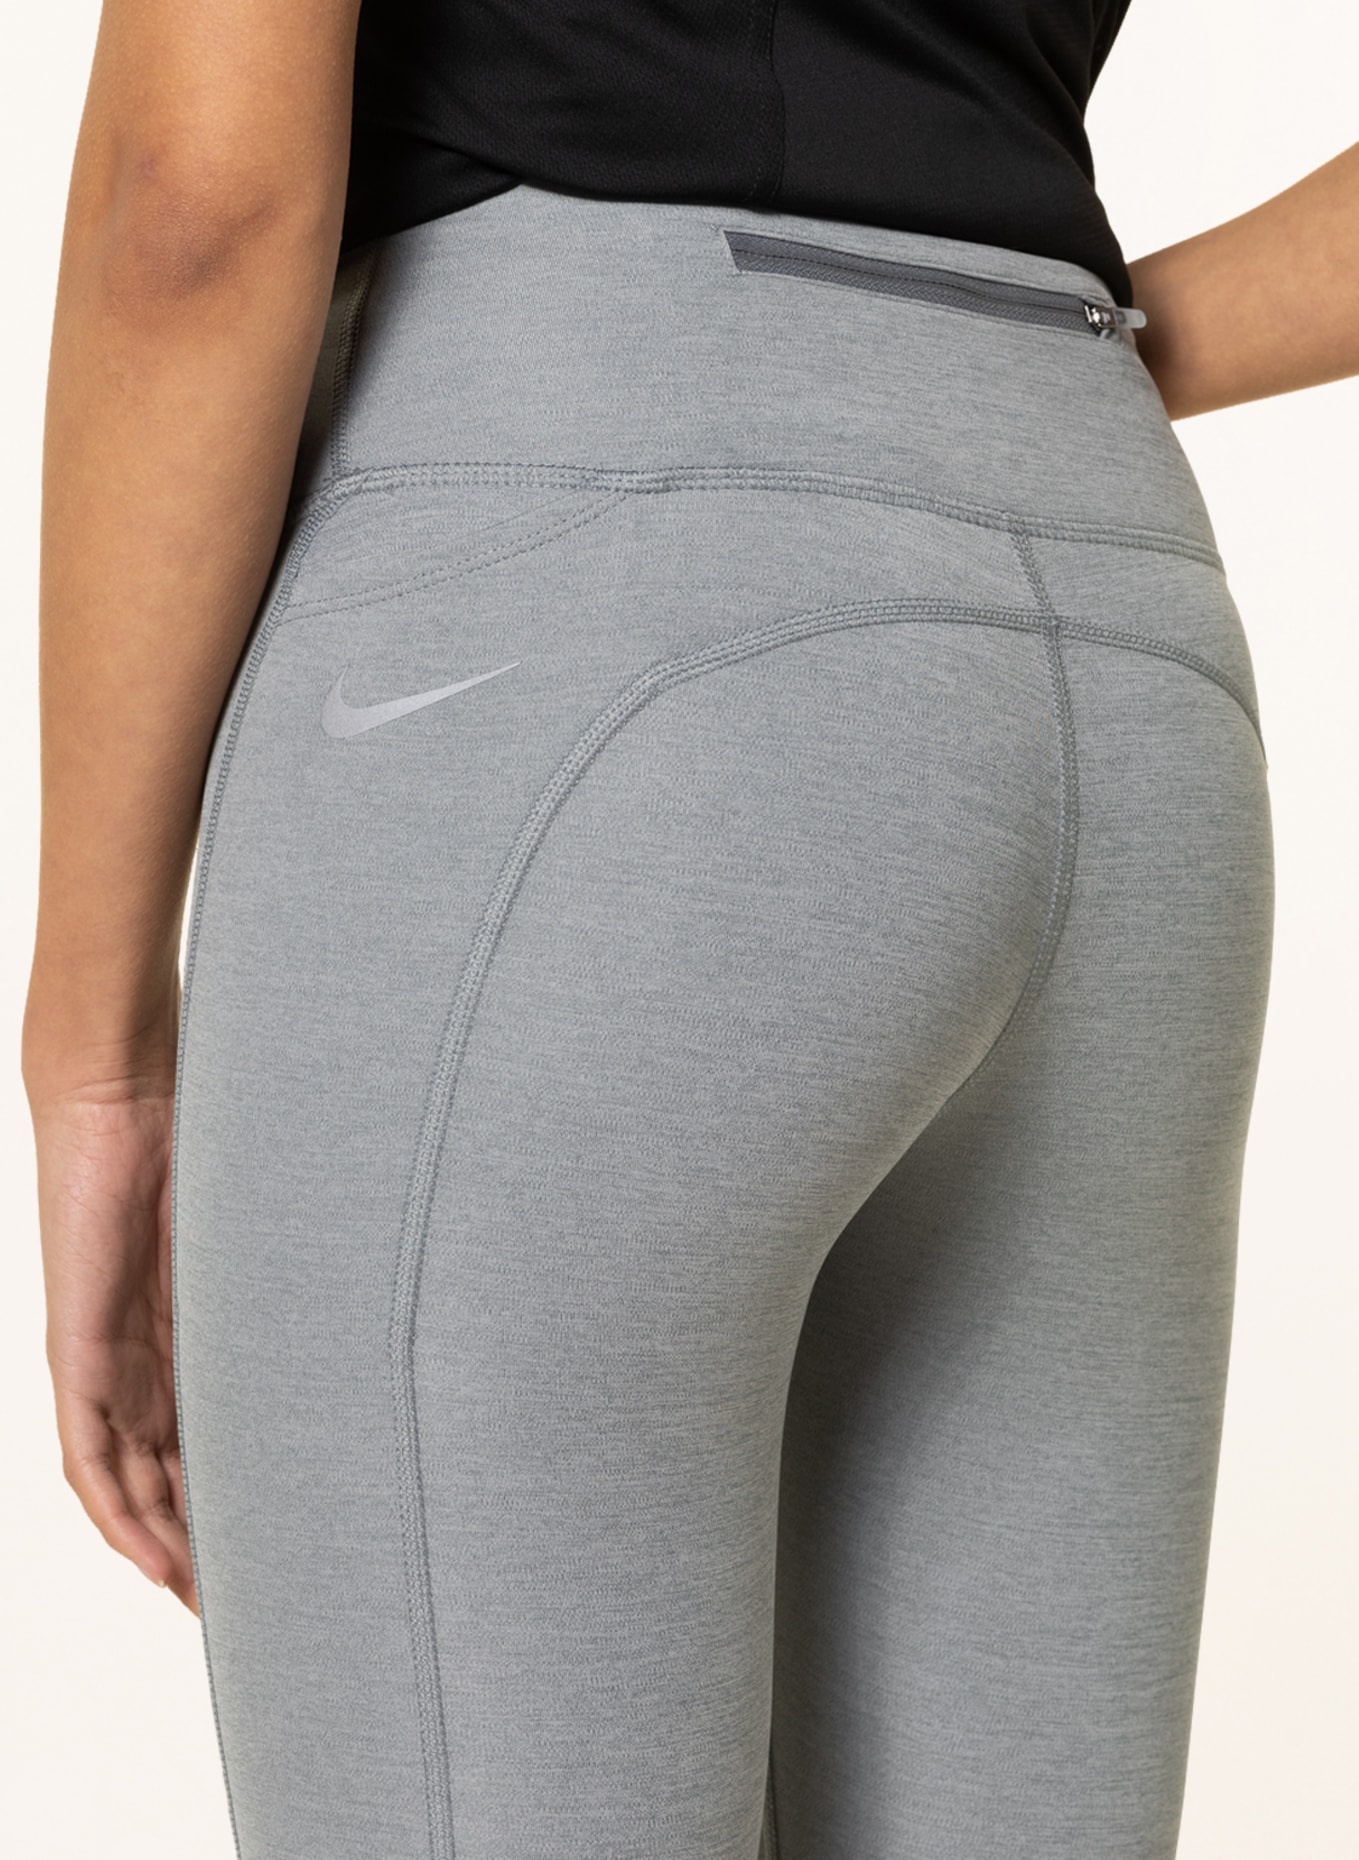 Nike Running tights EPIC FAST with mesh, Color: LIGHT GRAY (Image 5)